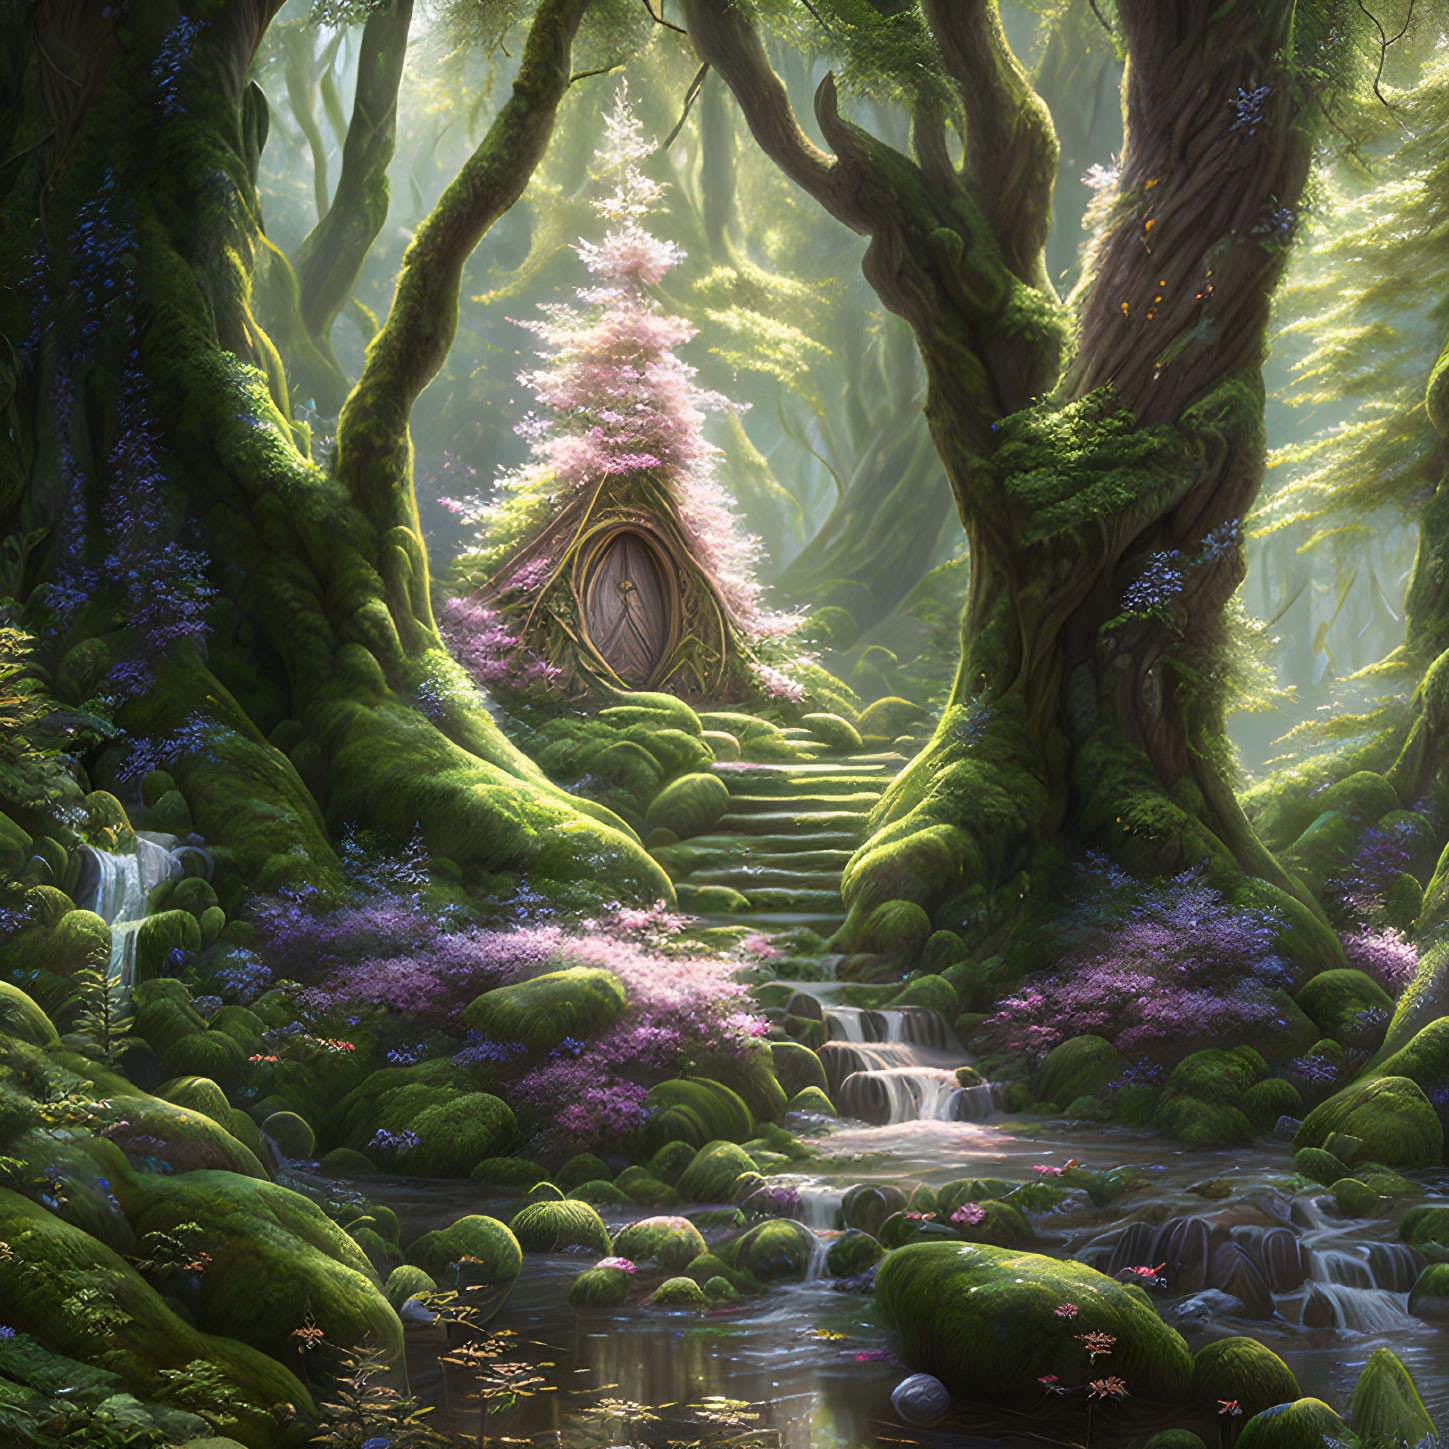 Enchanting forest scene with lush greenery, stream, purple flowers, and whimsical treehouse